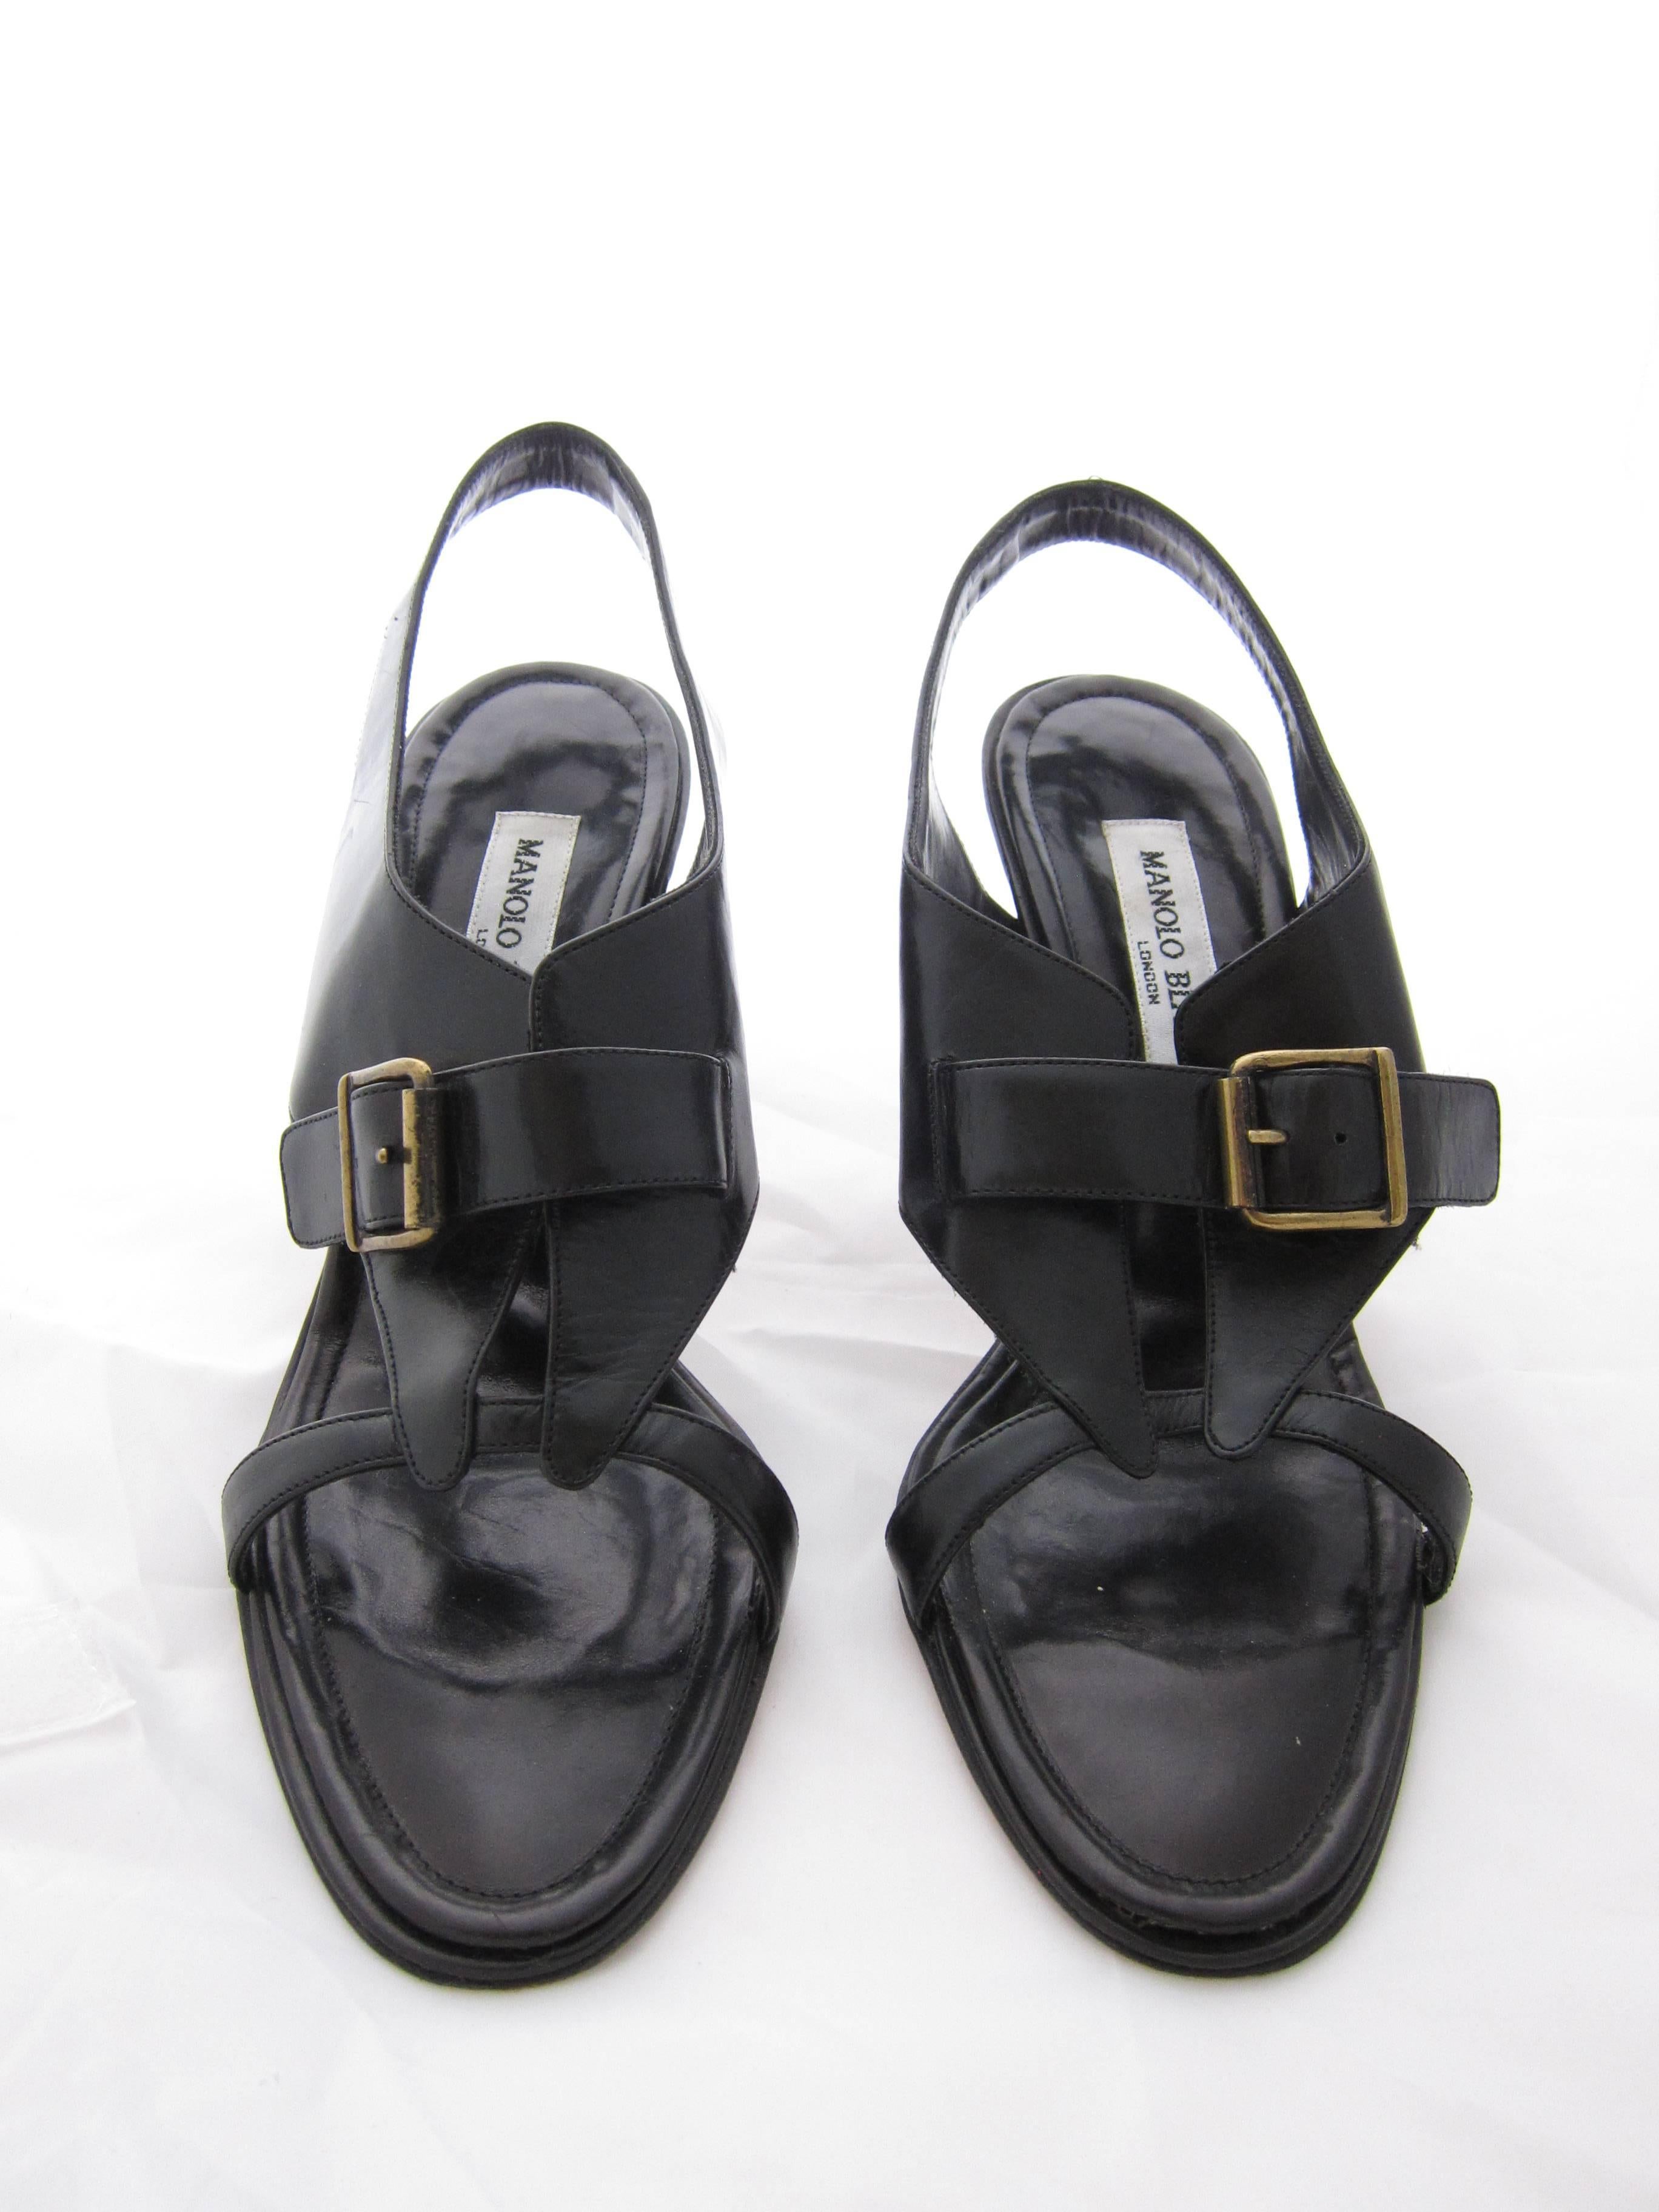 Really nice Manolo Blahnik Black Leather Sandals in blakc leather an 
d brass hardware.

Size Us 7 (french 38 and a half)

Good condition. Some light signs of wear